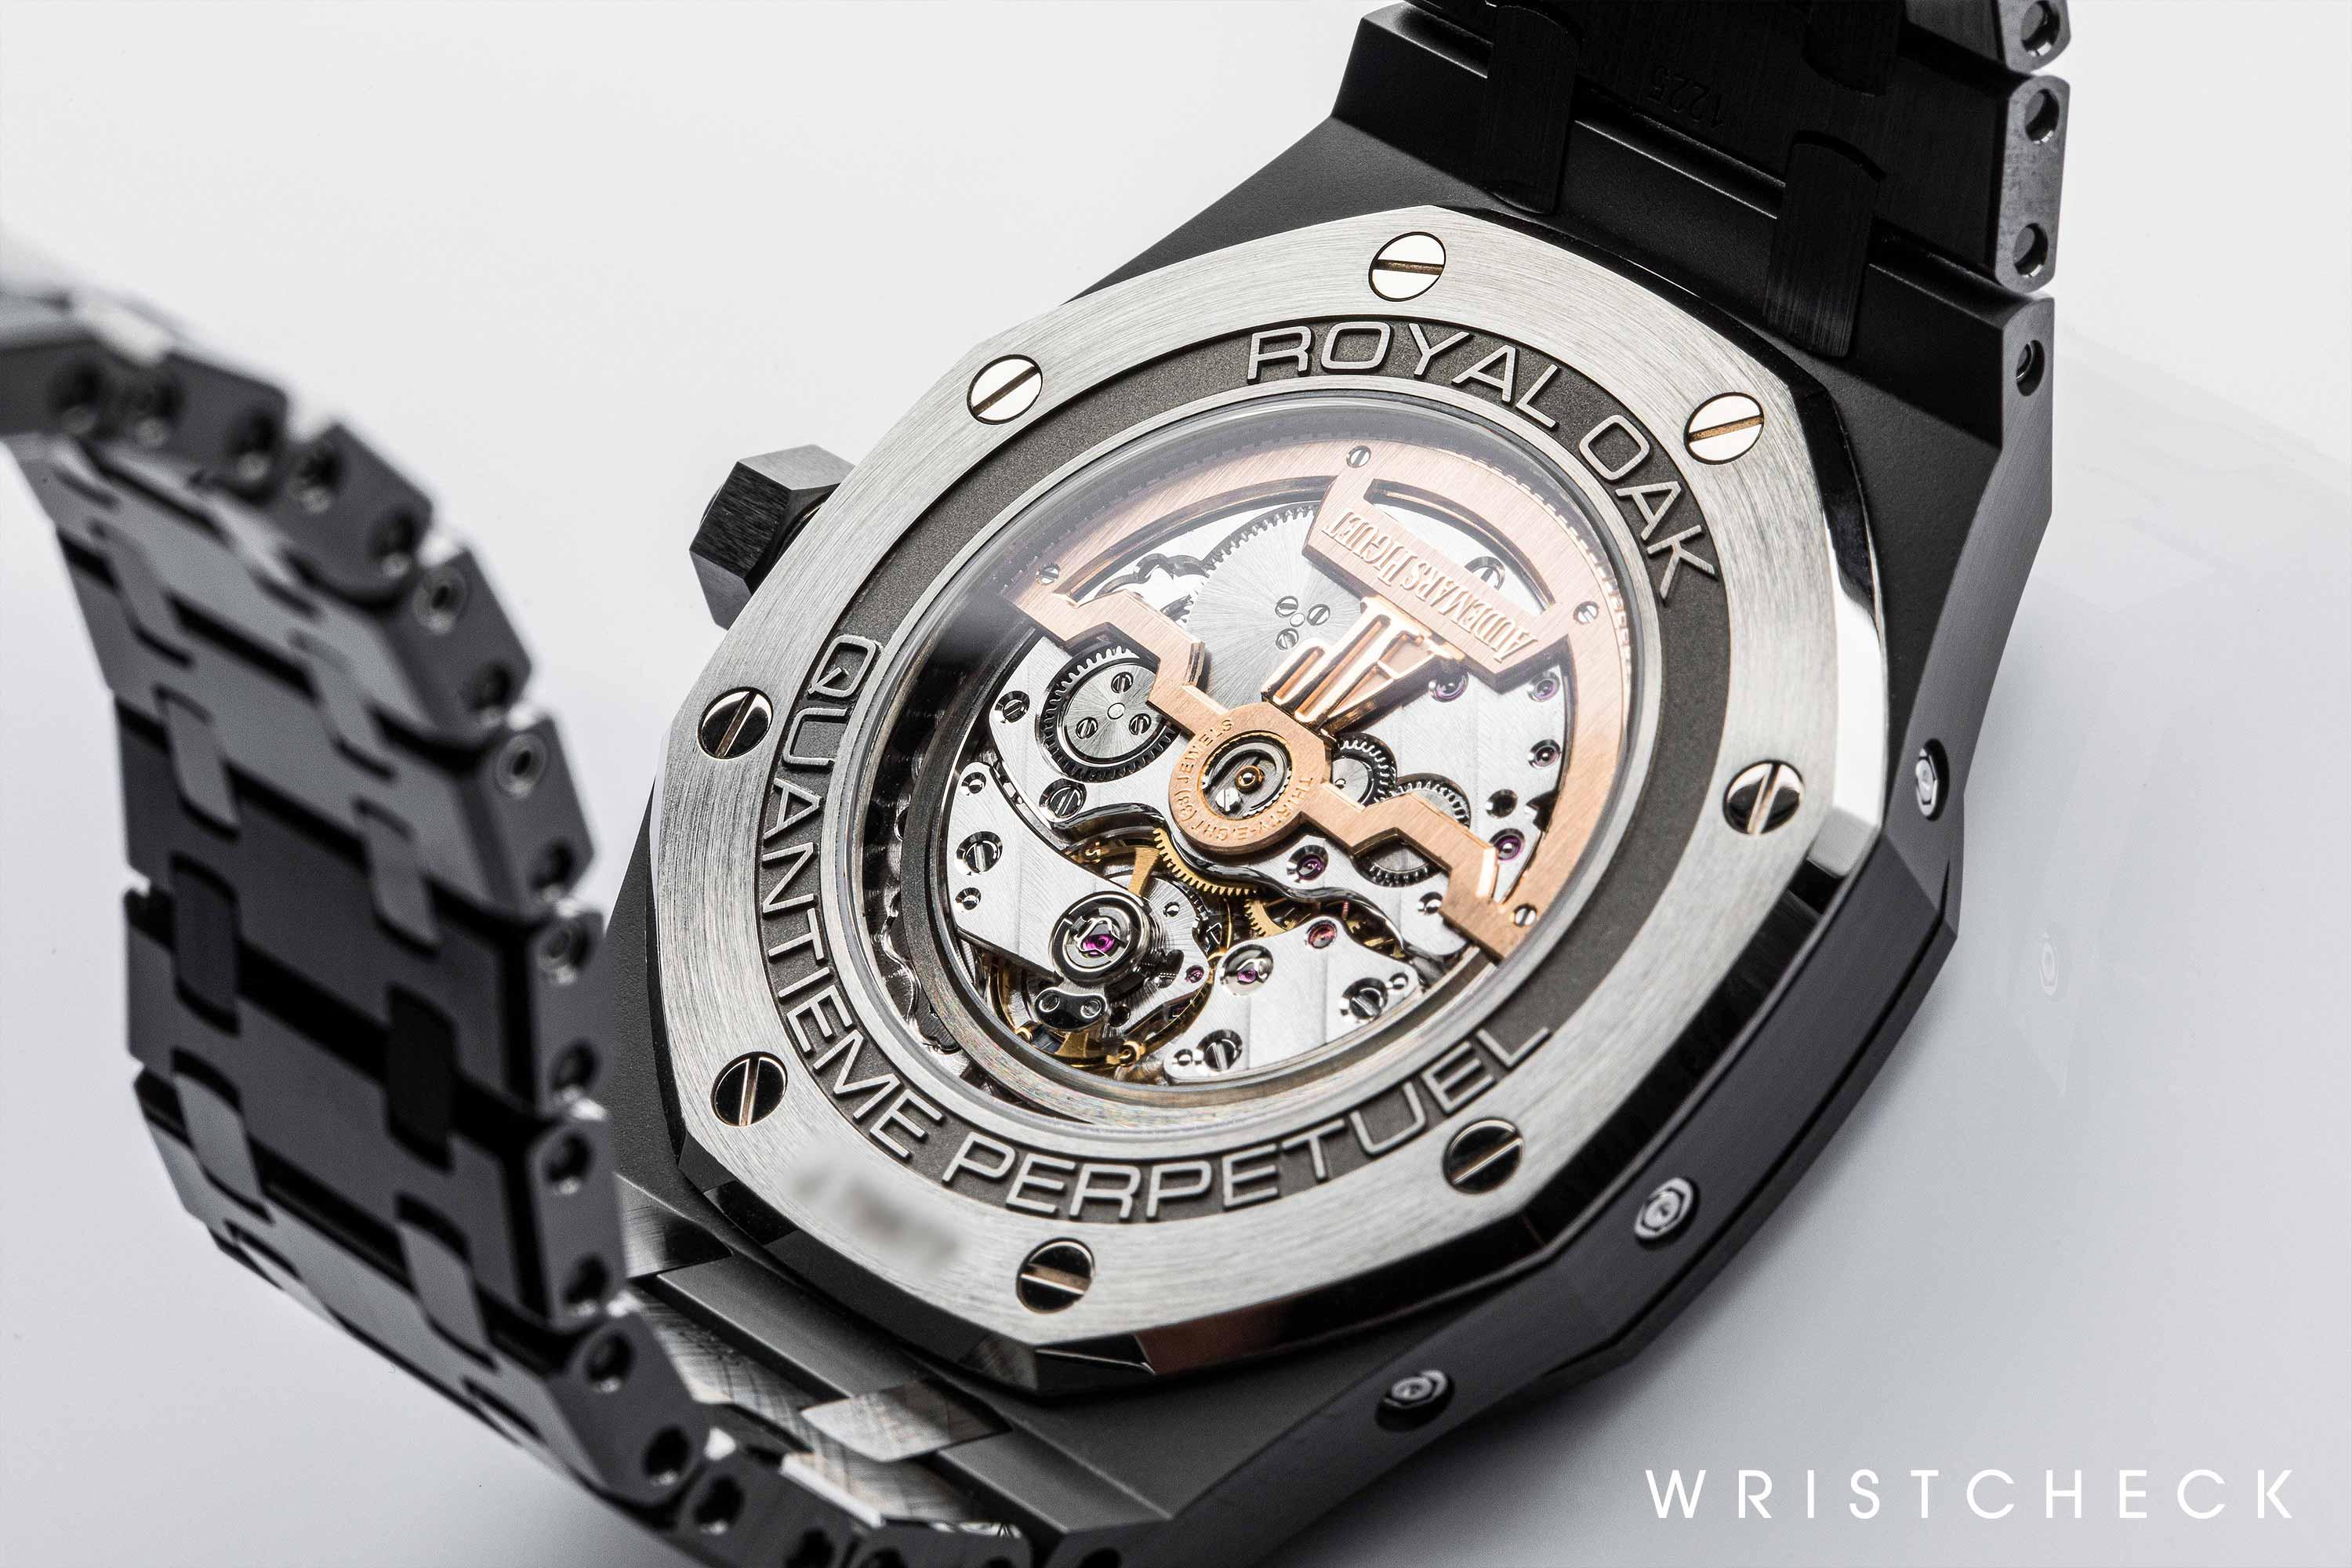 Movement is made visible through the glareproofed sapphire crystal caseback